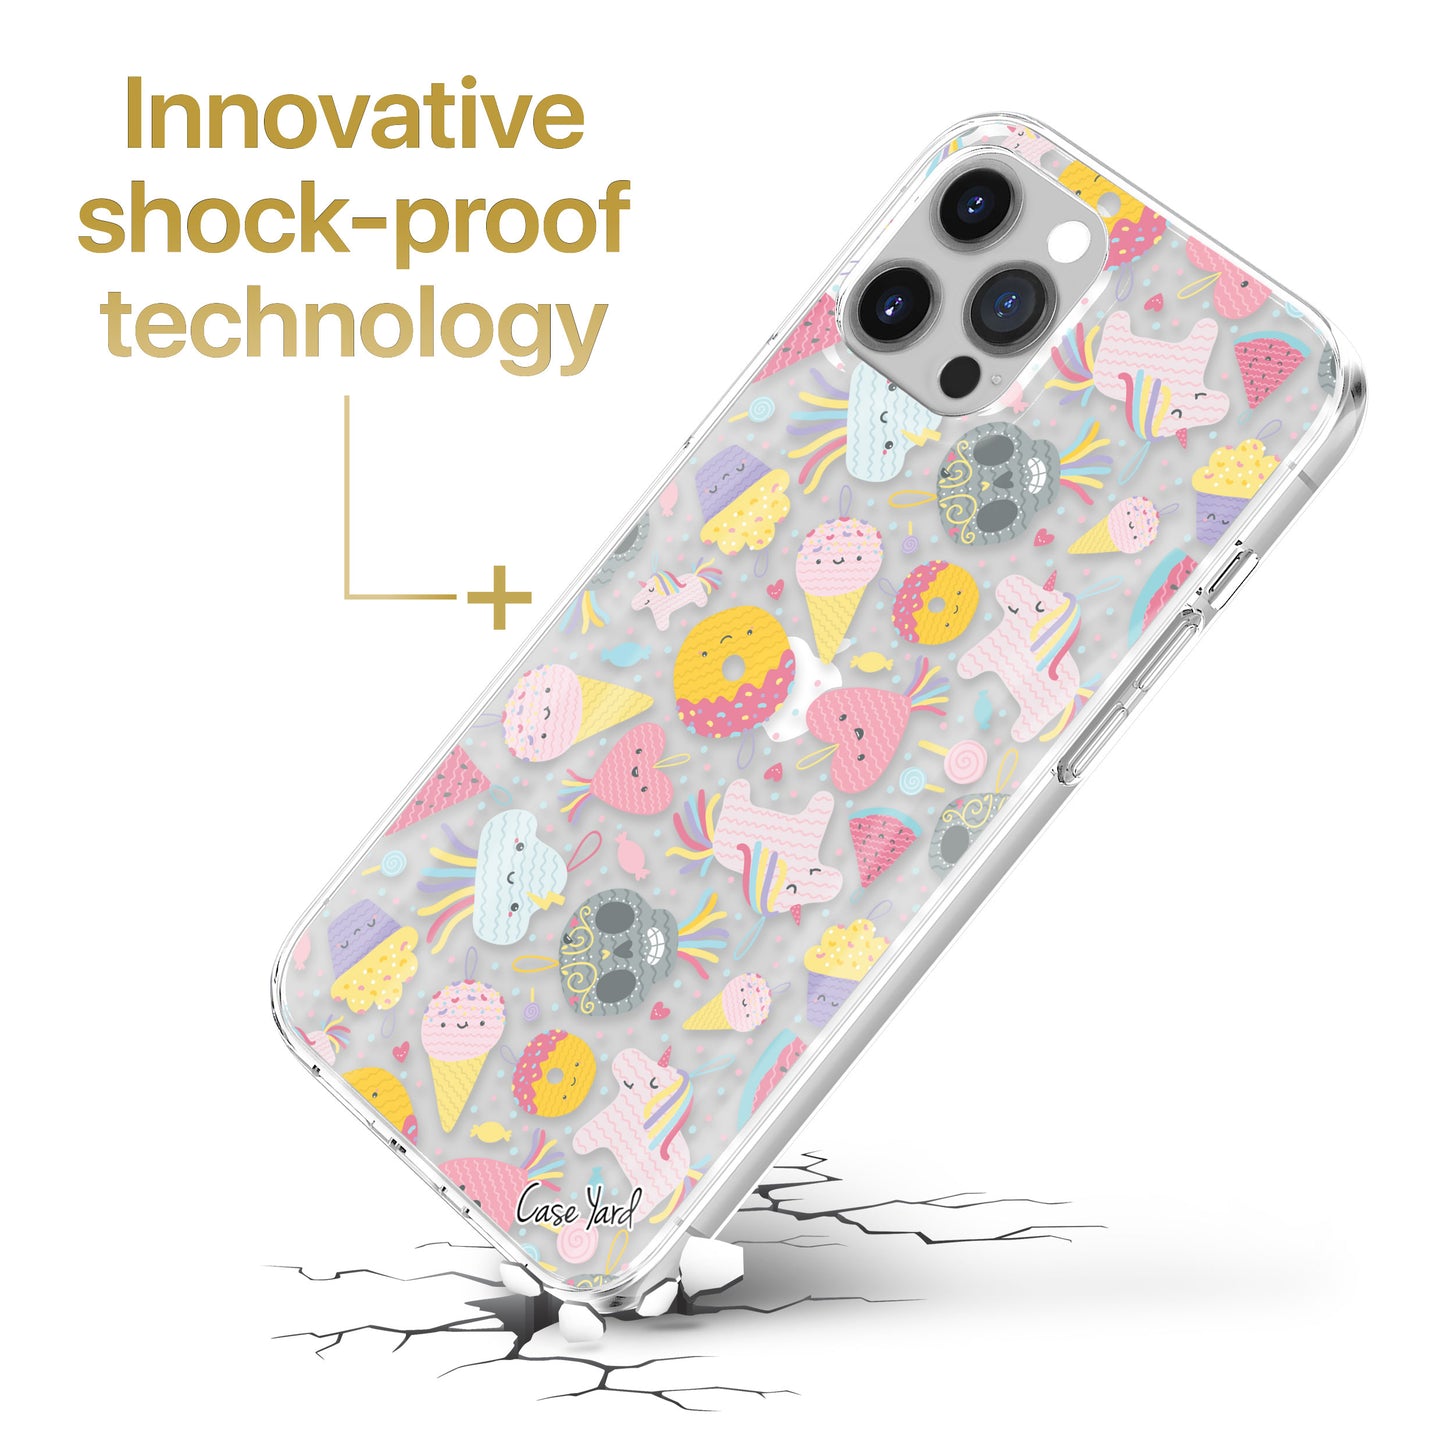 TPU Case Clear case with (Pinata) Design for iPhone & Samsung Phones